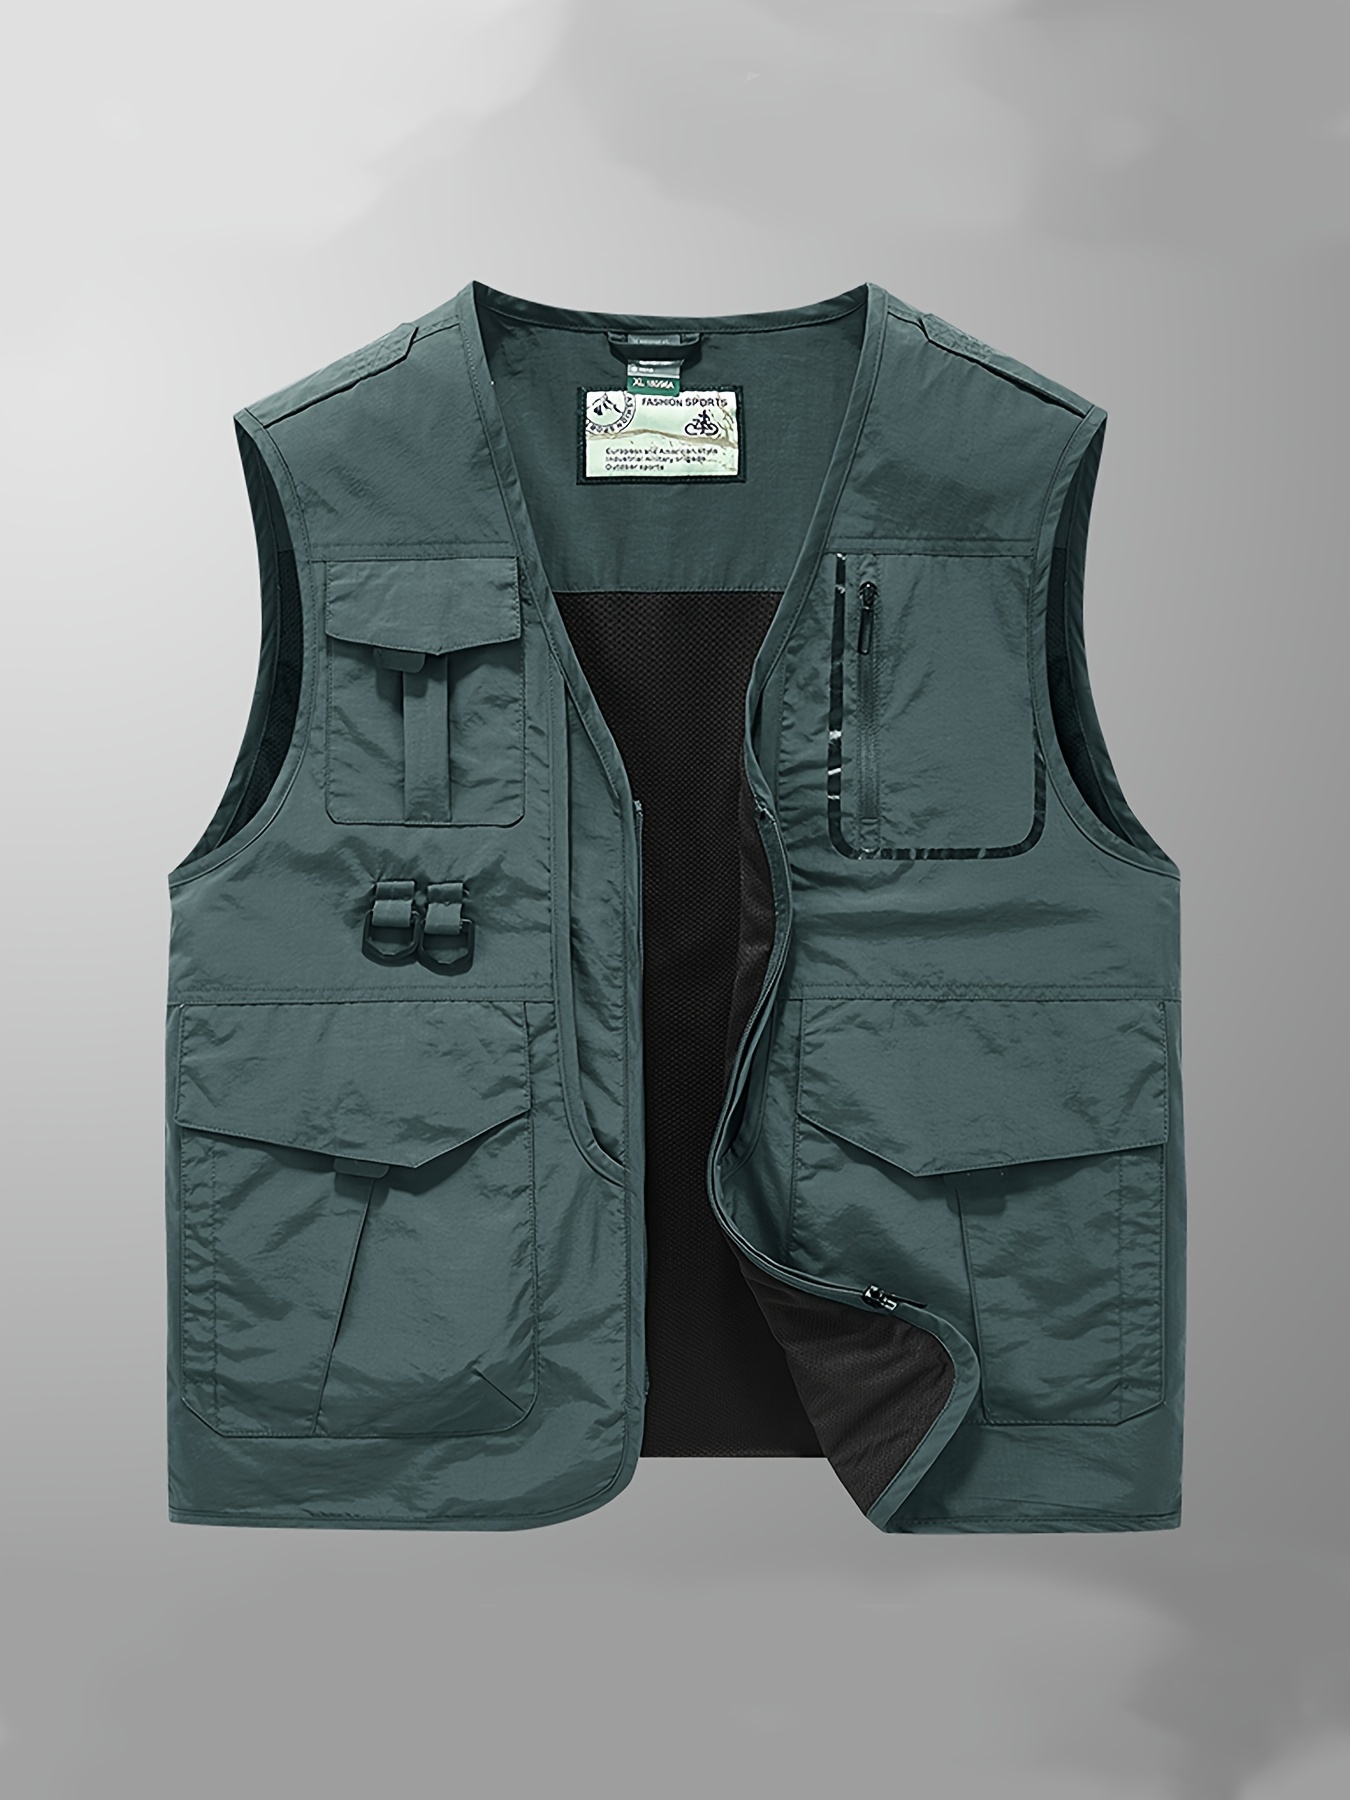 Breathable Fishing Vest 600D Oxford Cloth Waistcoat for Fisherman (Black  Grey)